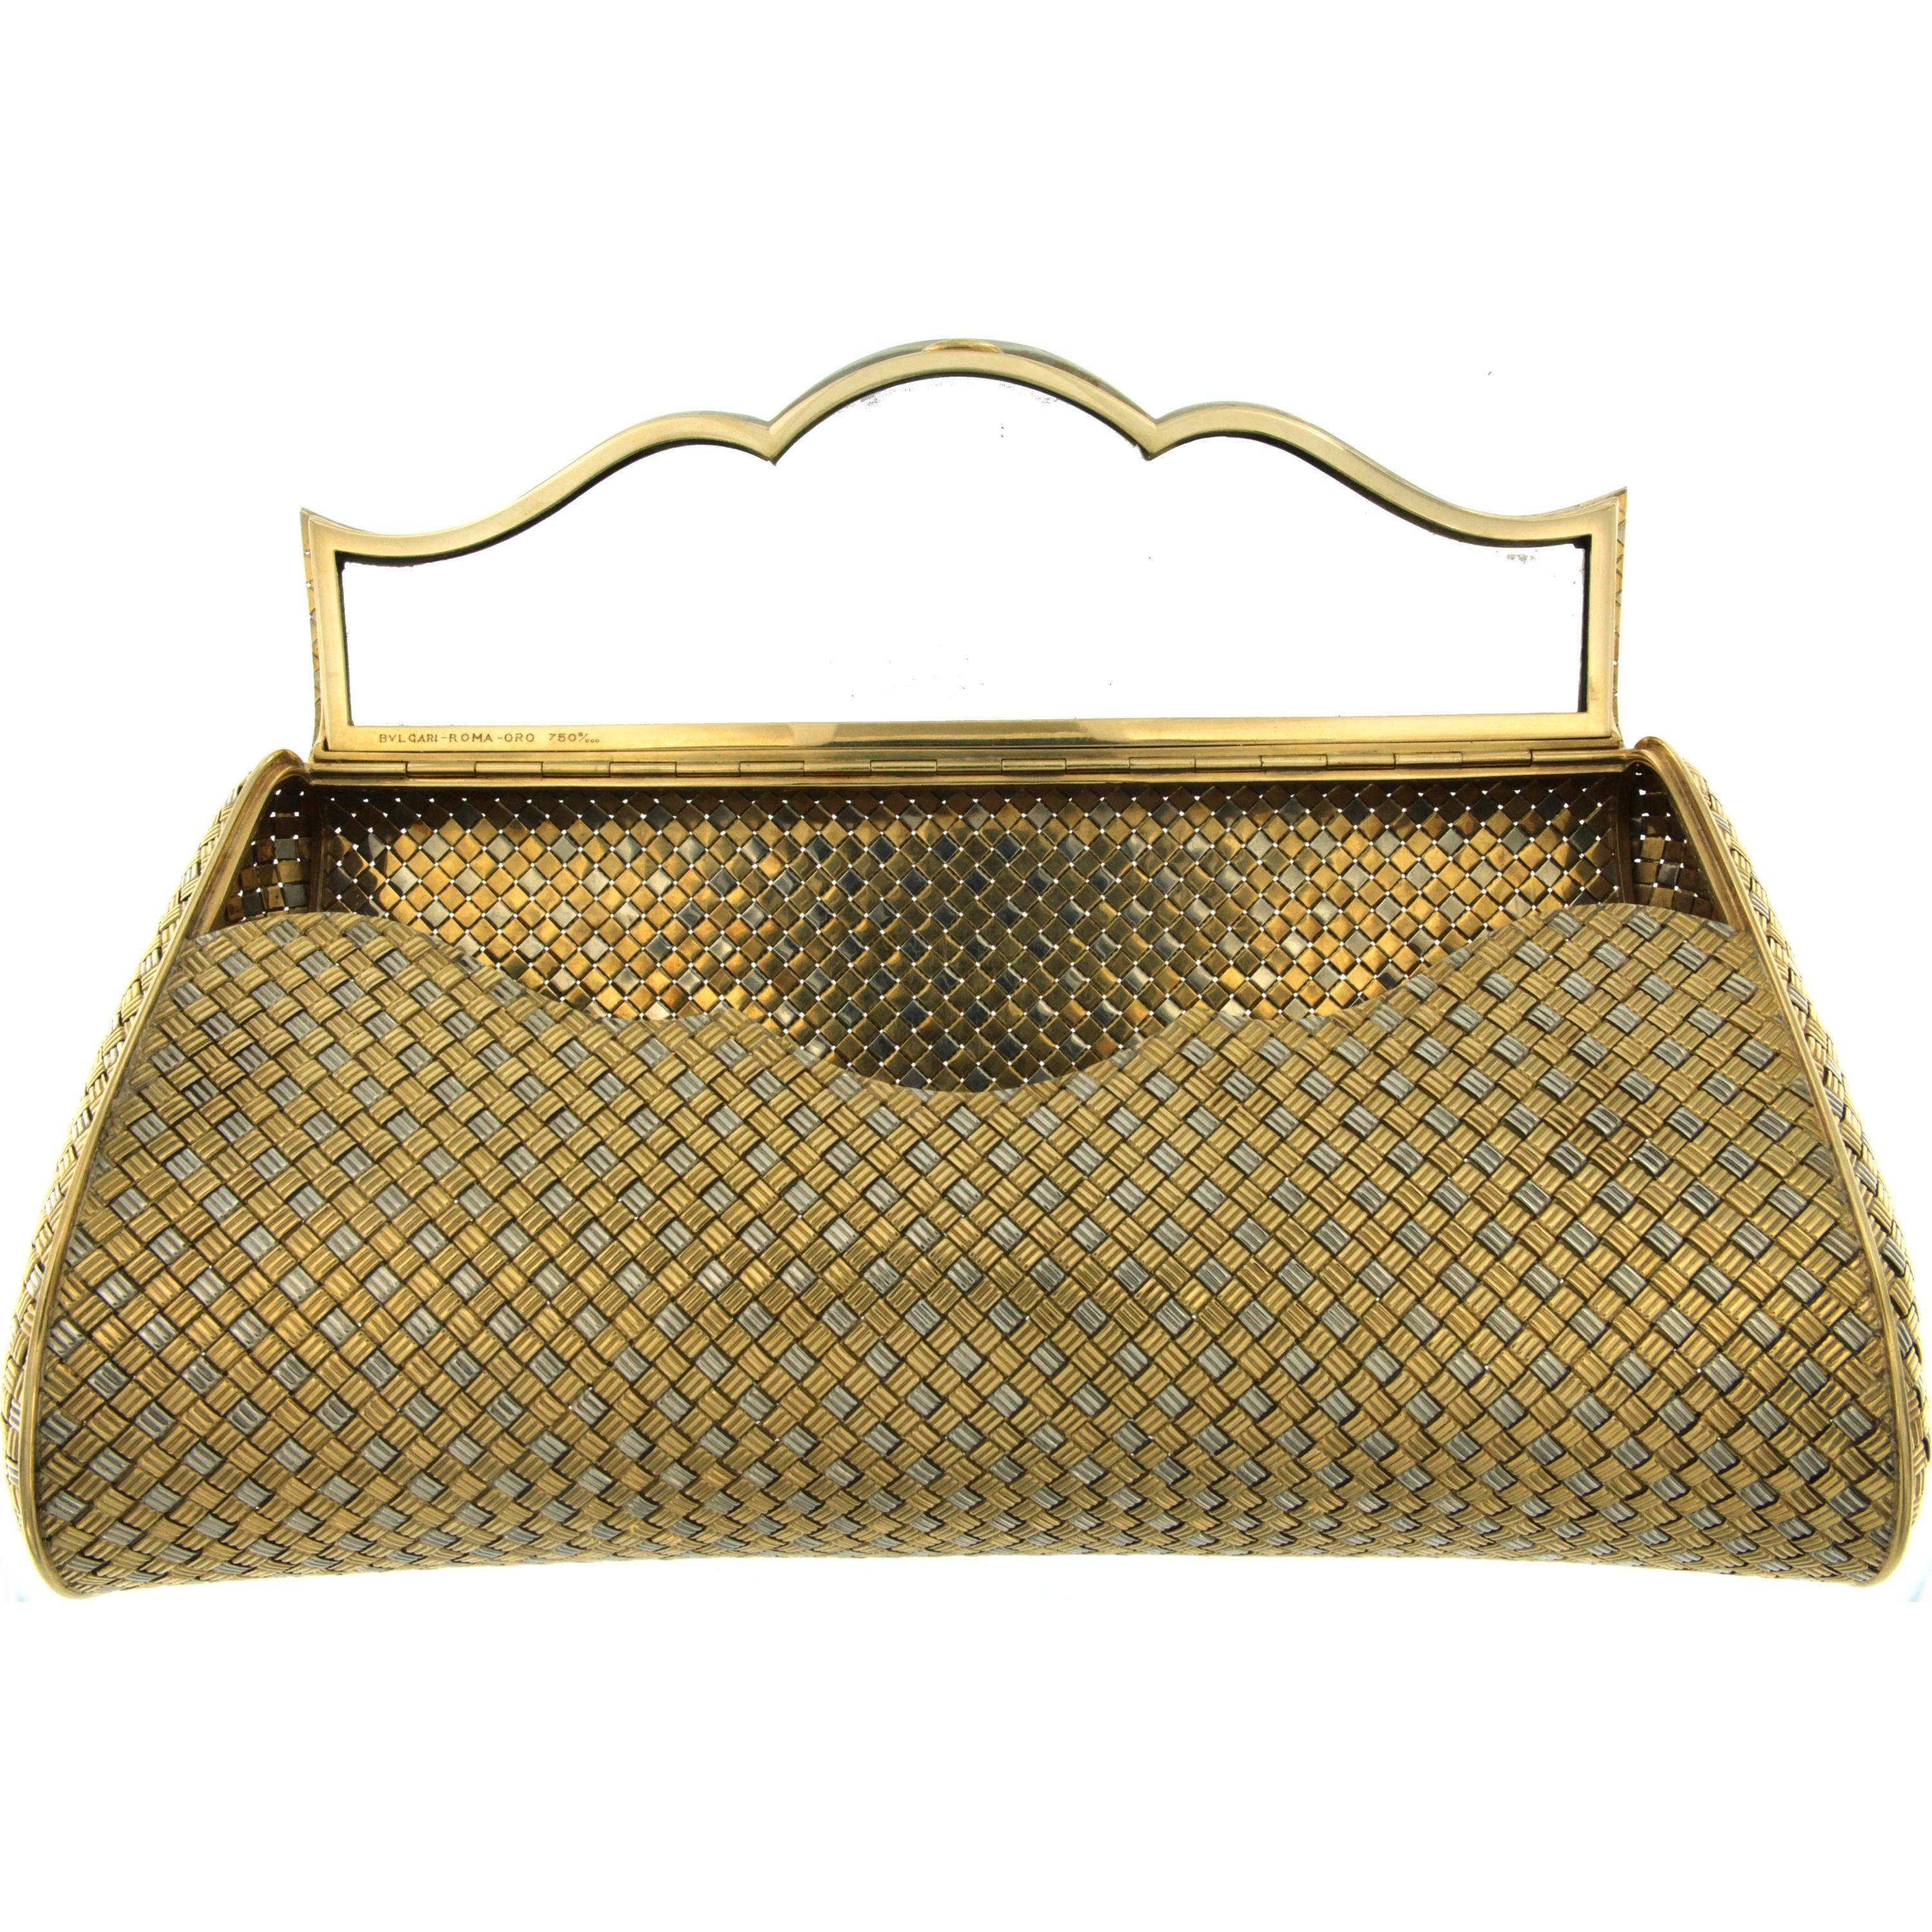 An Elegant White and Yellow Gold Evening Bag by Bulgari. 

A Magnificent craftwork circa 1980 opening to reveal a fitted mirror.
Made of solid 18k Gold marked and Signed 